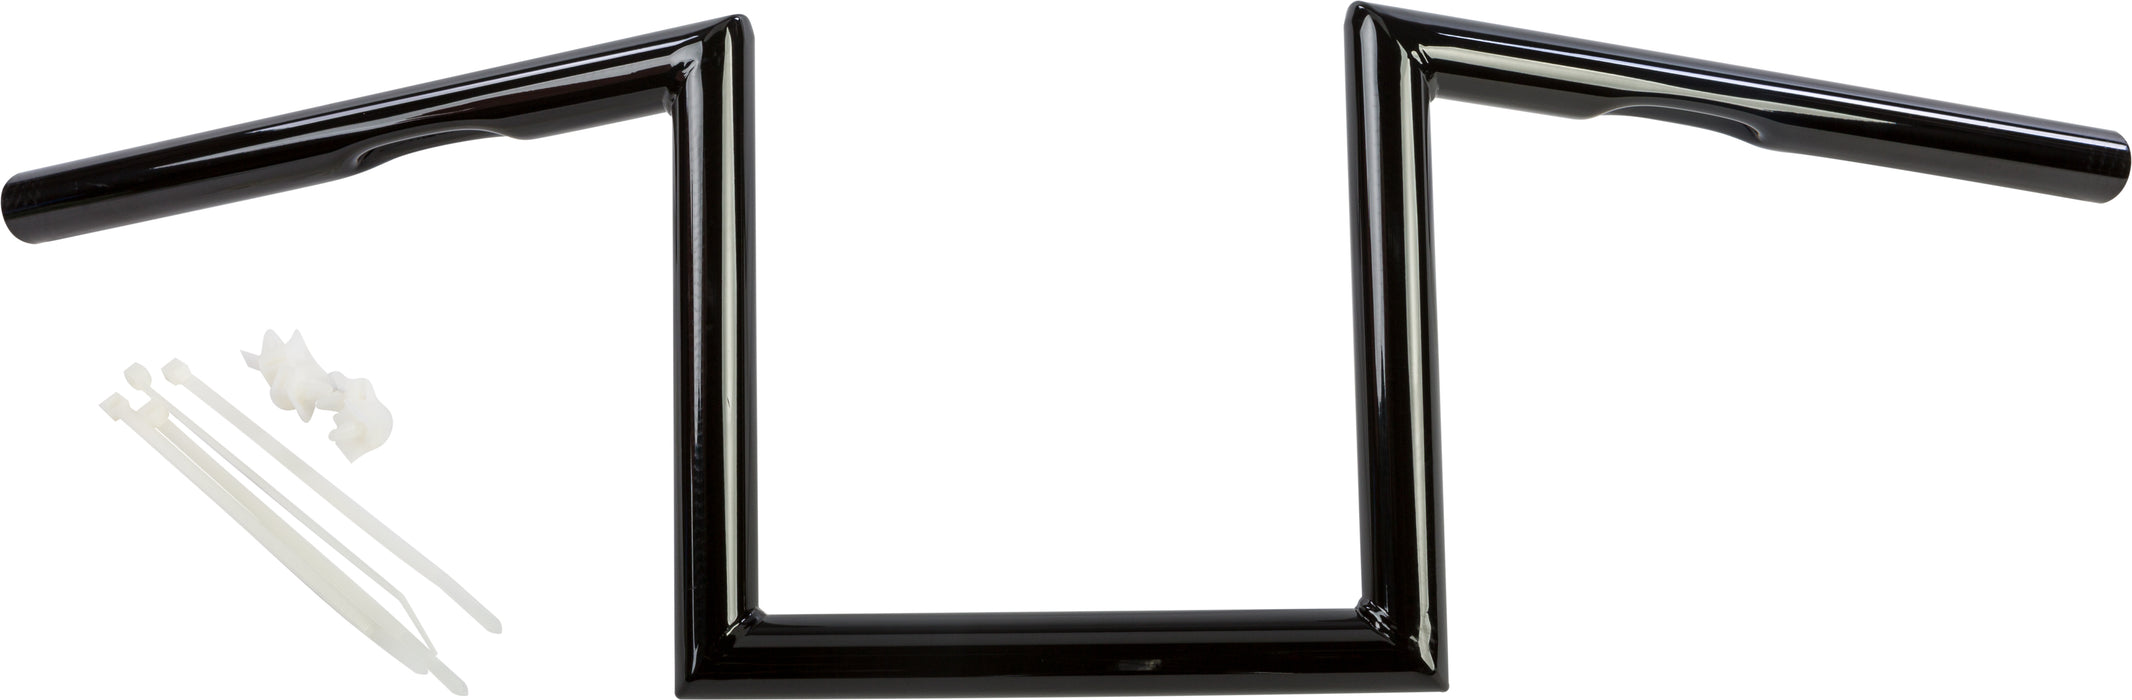 Z Bar One Inch Dimpled 8 Inch Gloss Black